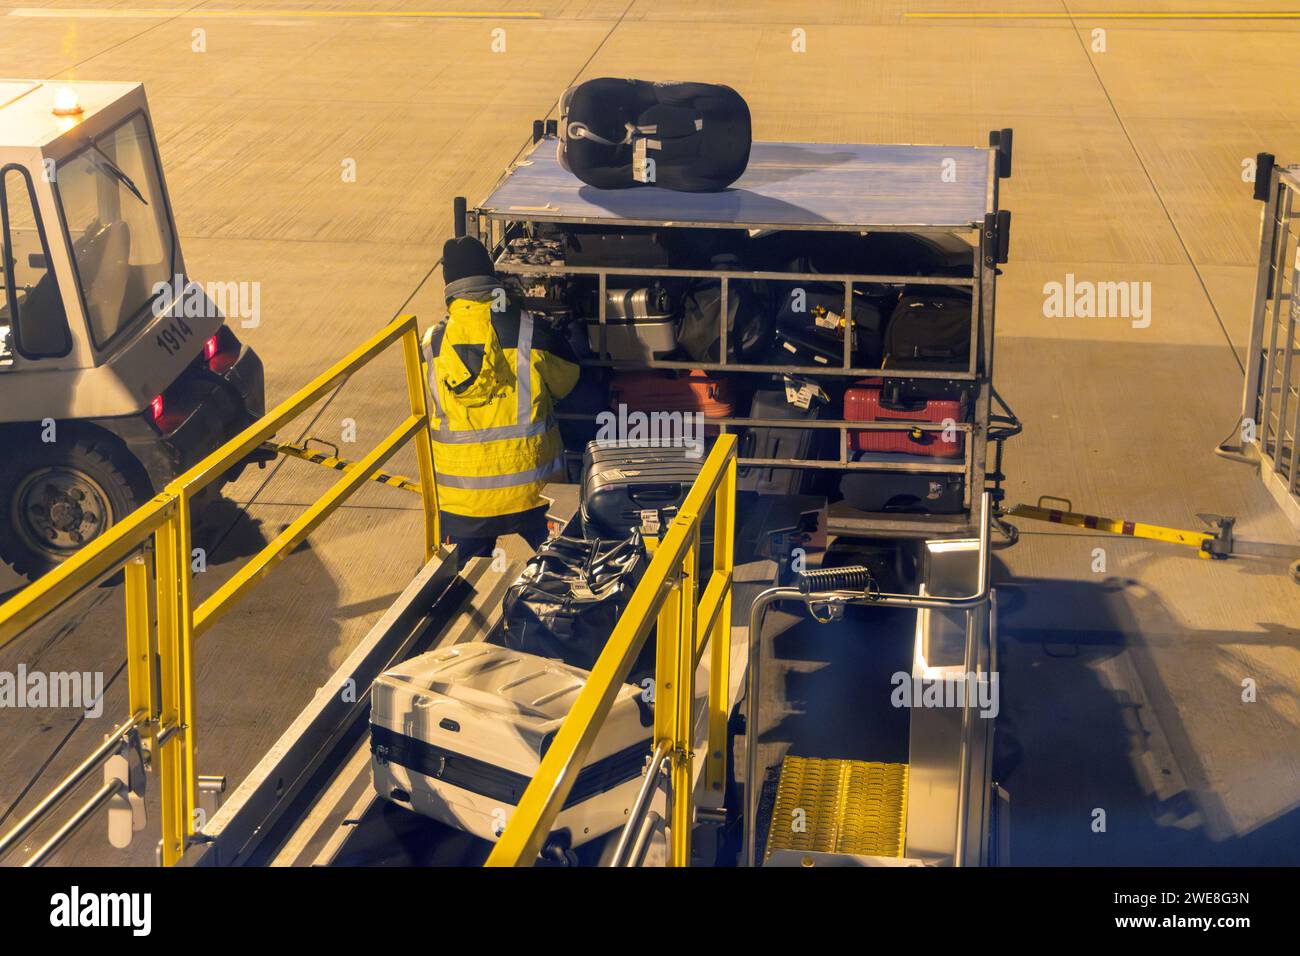 Loading luggage onto the plane at the night airport Stock Photo